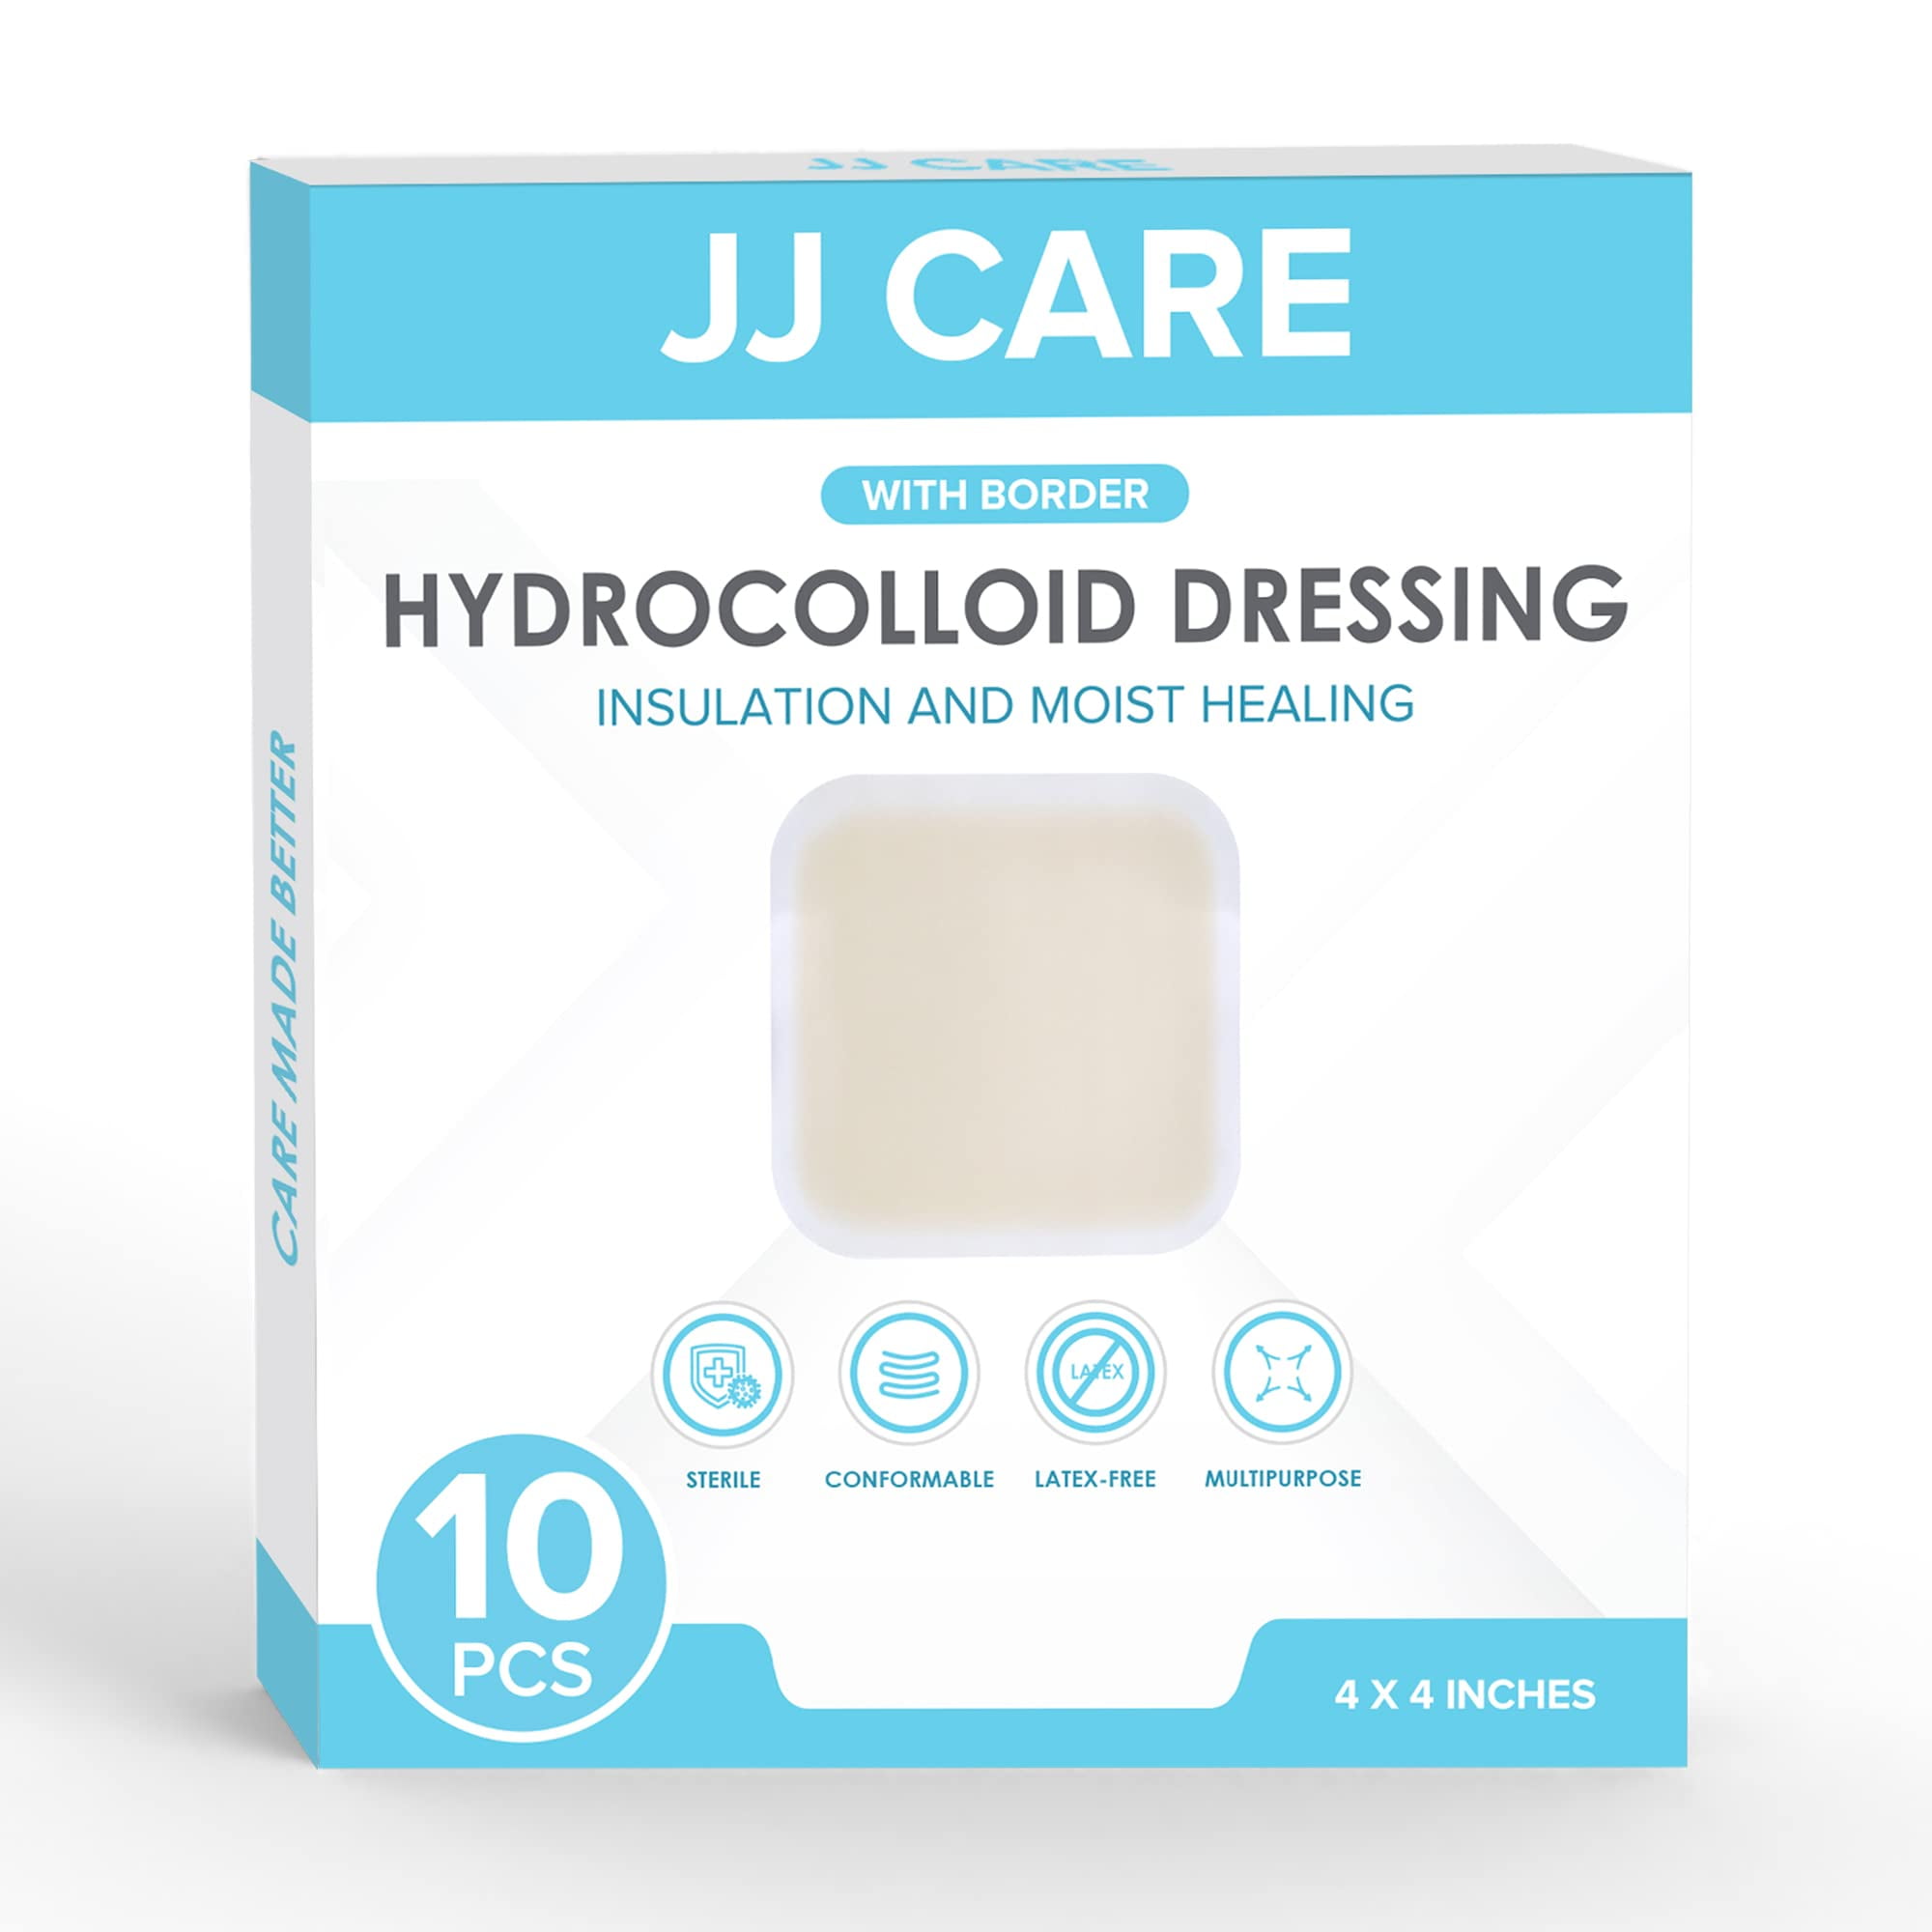 JJ CARE Hydrocolloid Dressing 4x4 [Pack 10], 0.8MM Thick Large Hydrocolloid  Bandages with Border, Self-Adhesive Thin Hydrocolloid Wound Dressing, Wound  Care Bandages for Bedsores and Blisters 